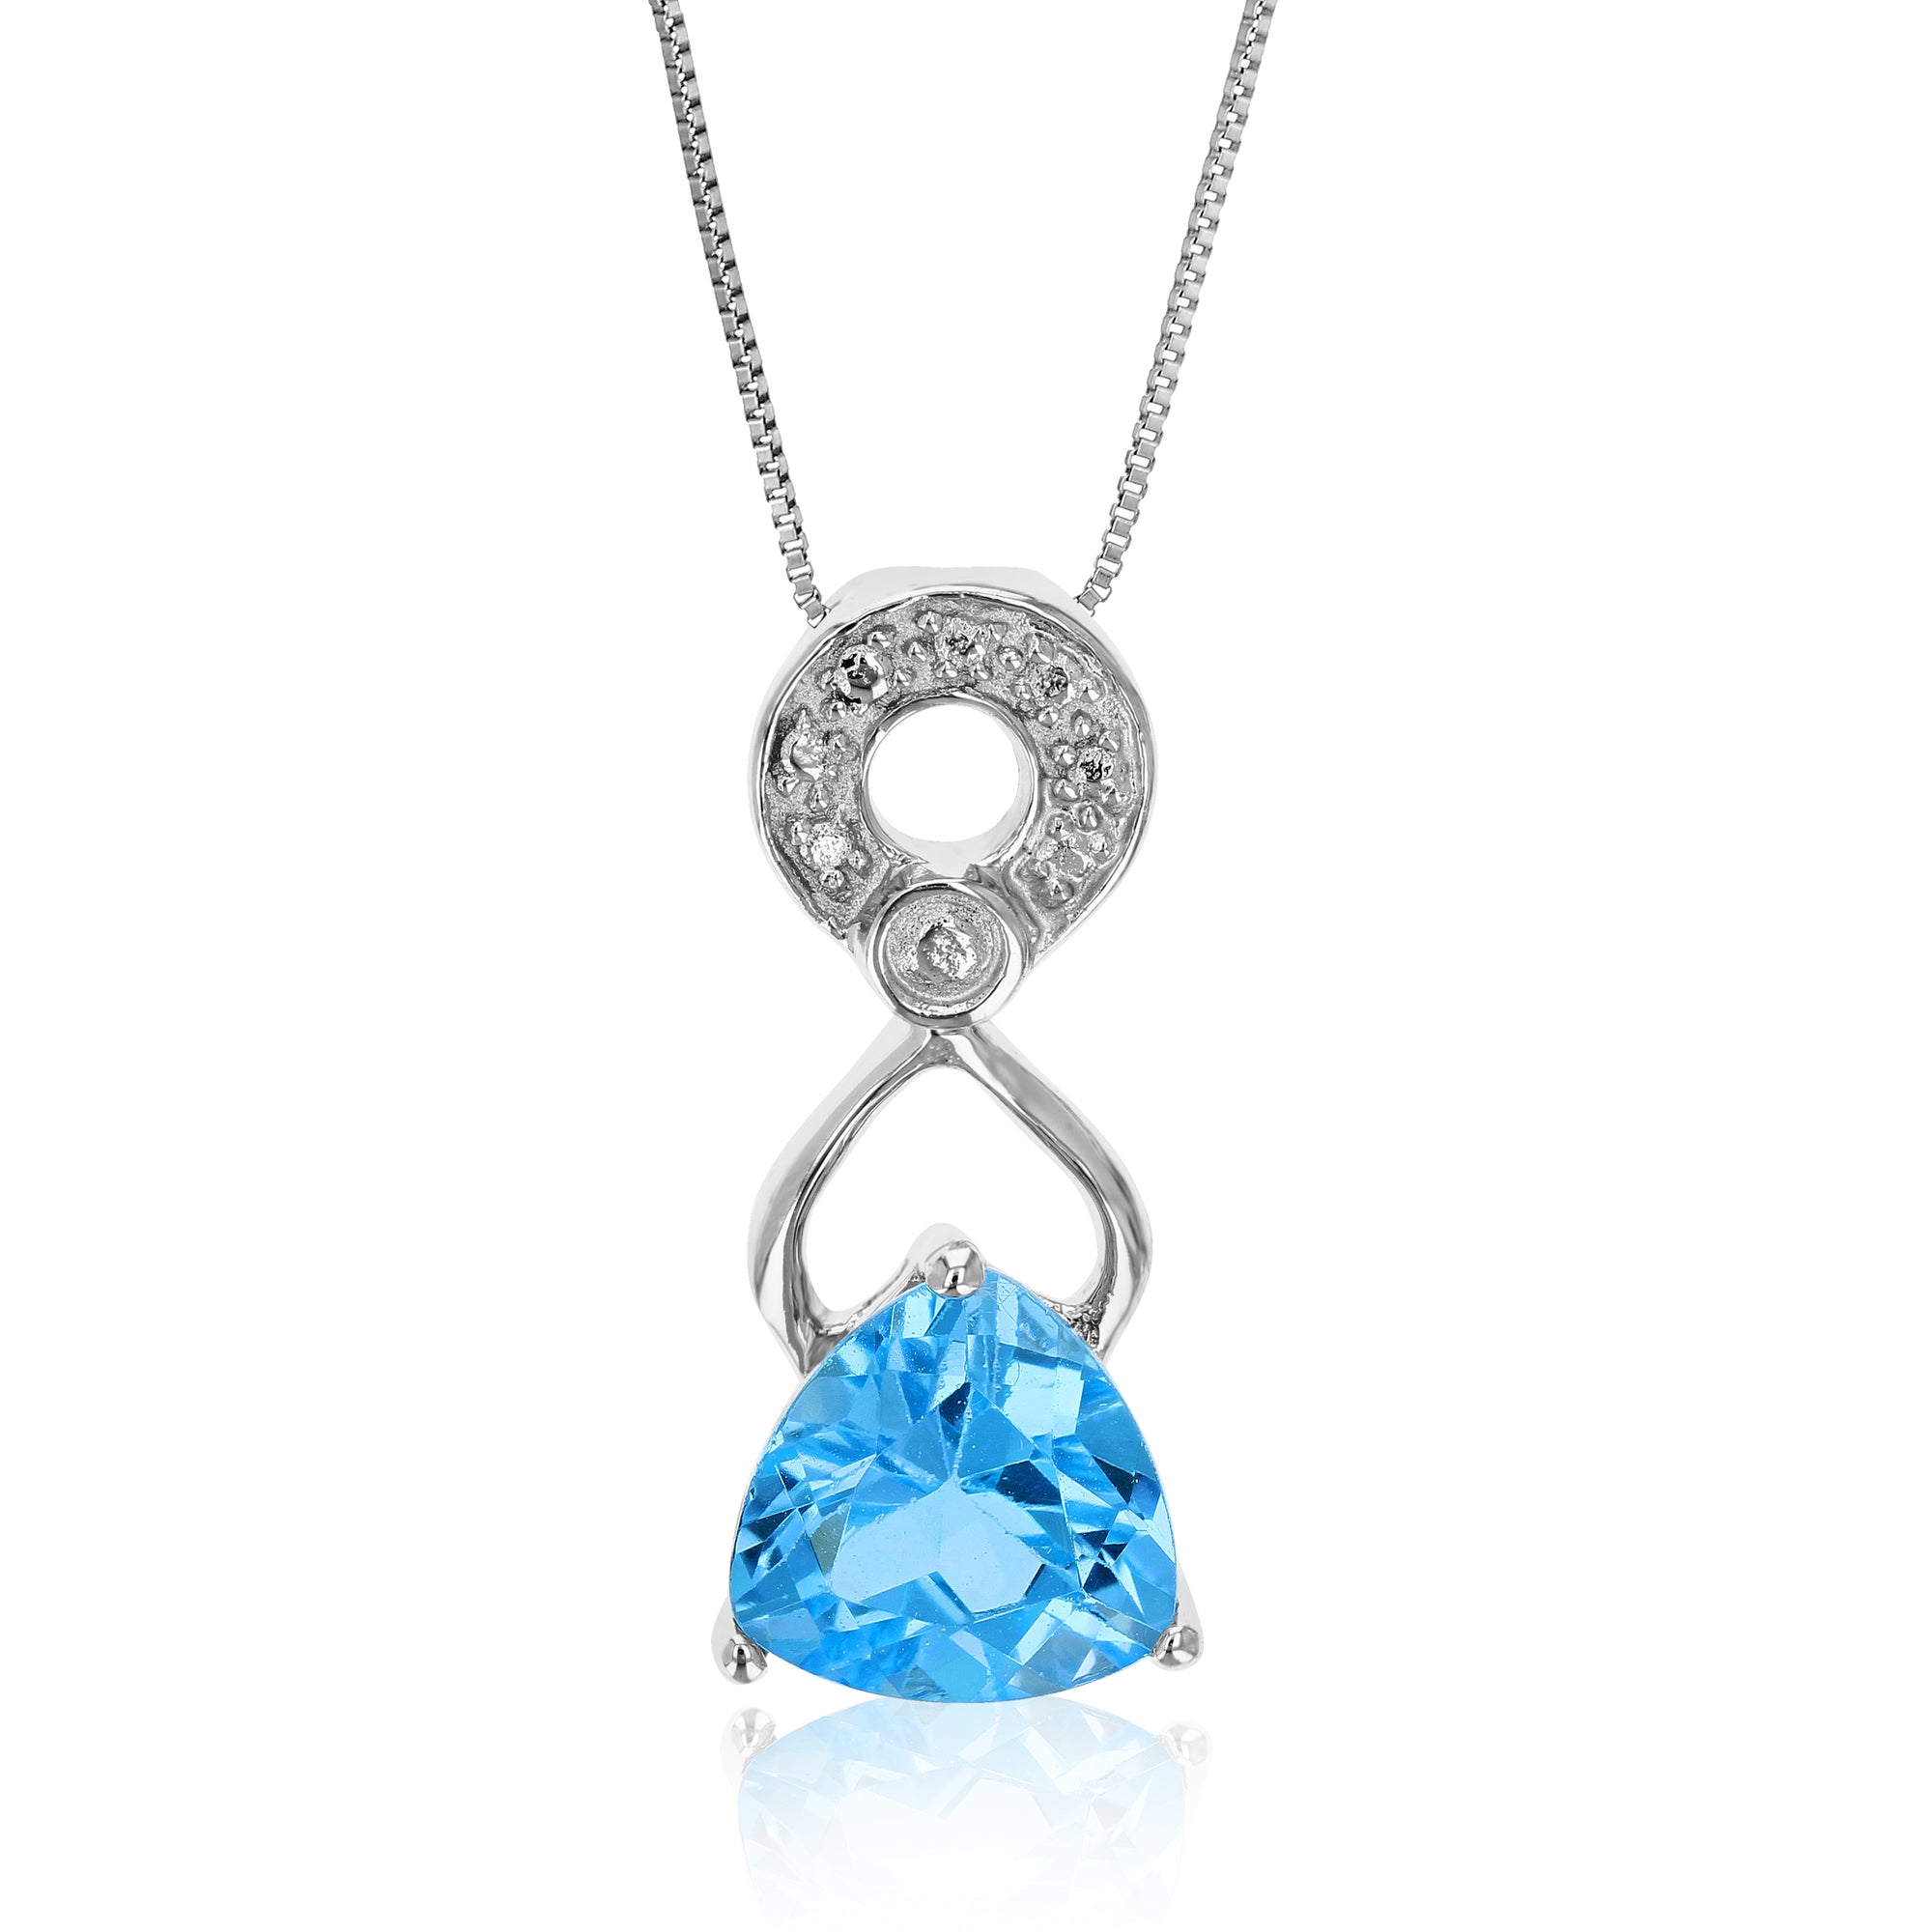 1 cttw Pendant Necklace, Swiss Blue Topaz Trillion Shape Pendant Necklace for Women in .925 Sterling Silver with Rhodium, 18 Inch Chain, Prong Setting